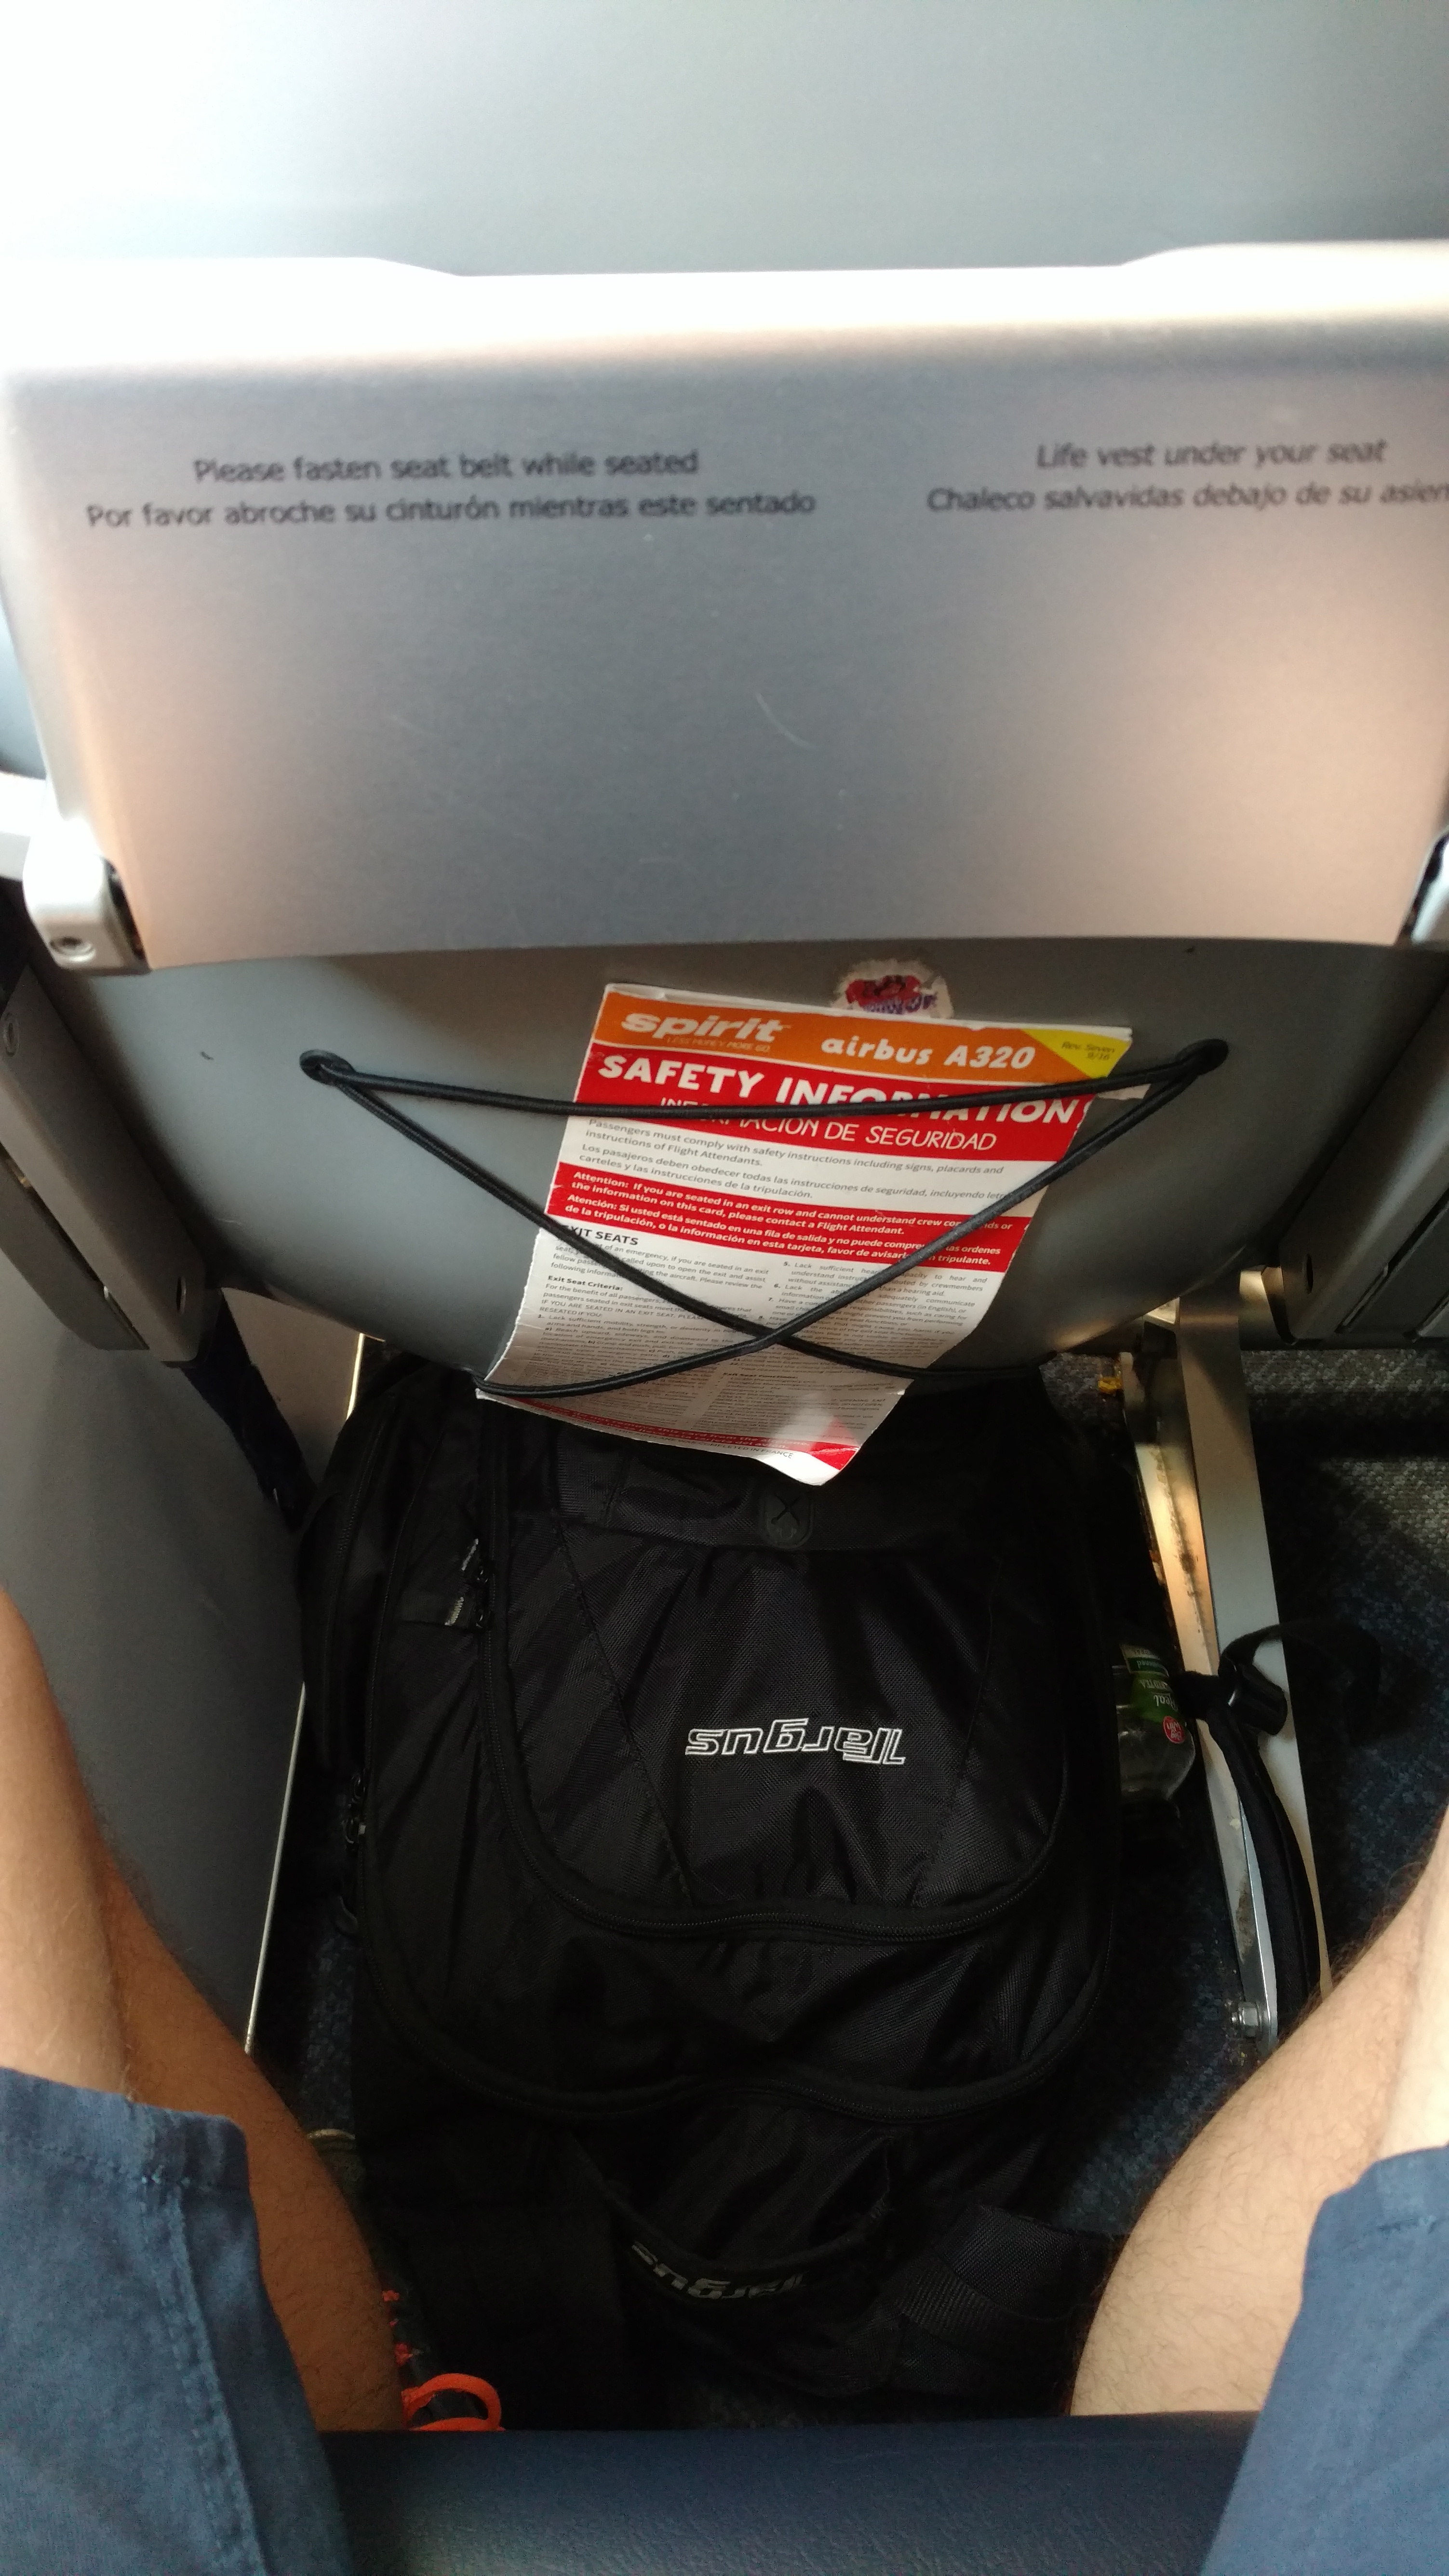 backpack under airplane seat